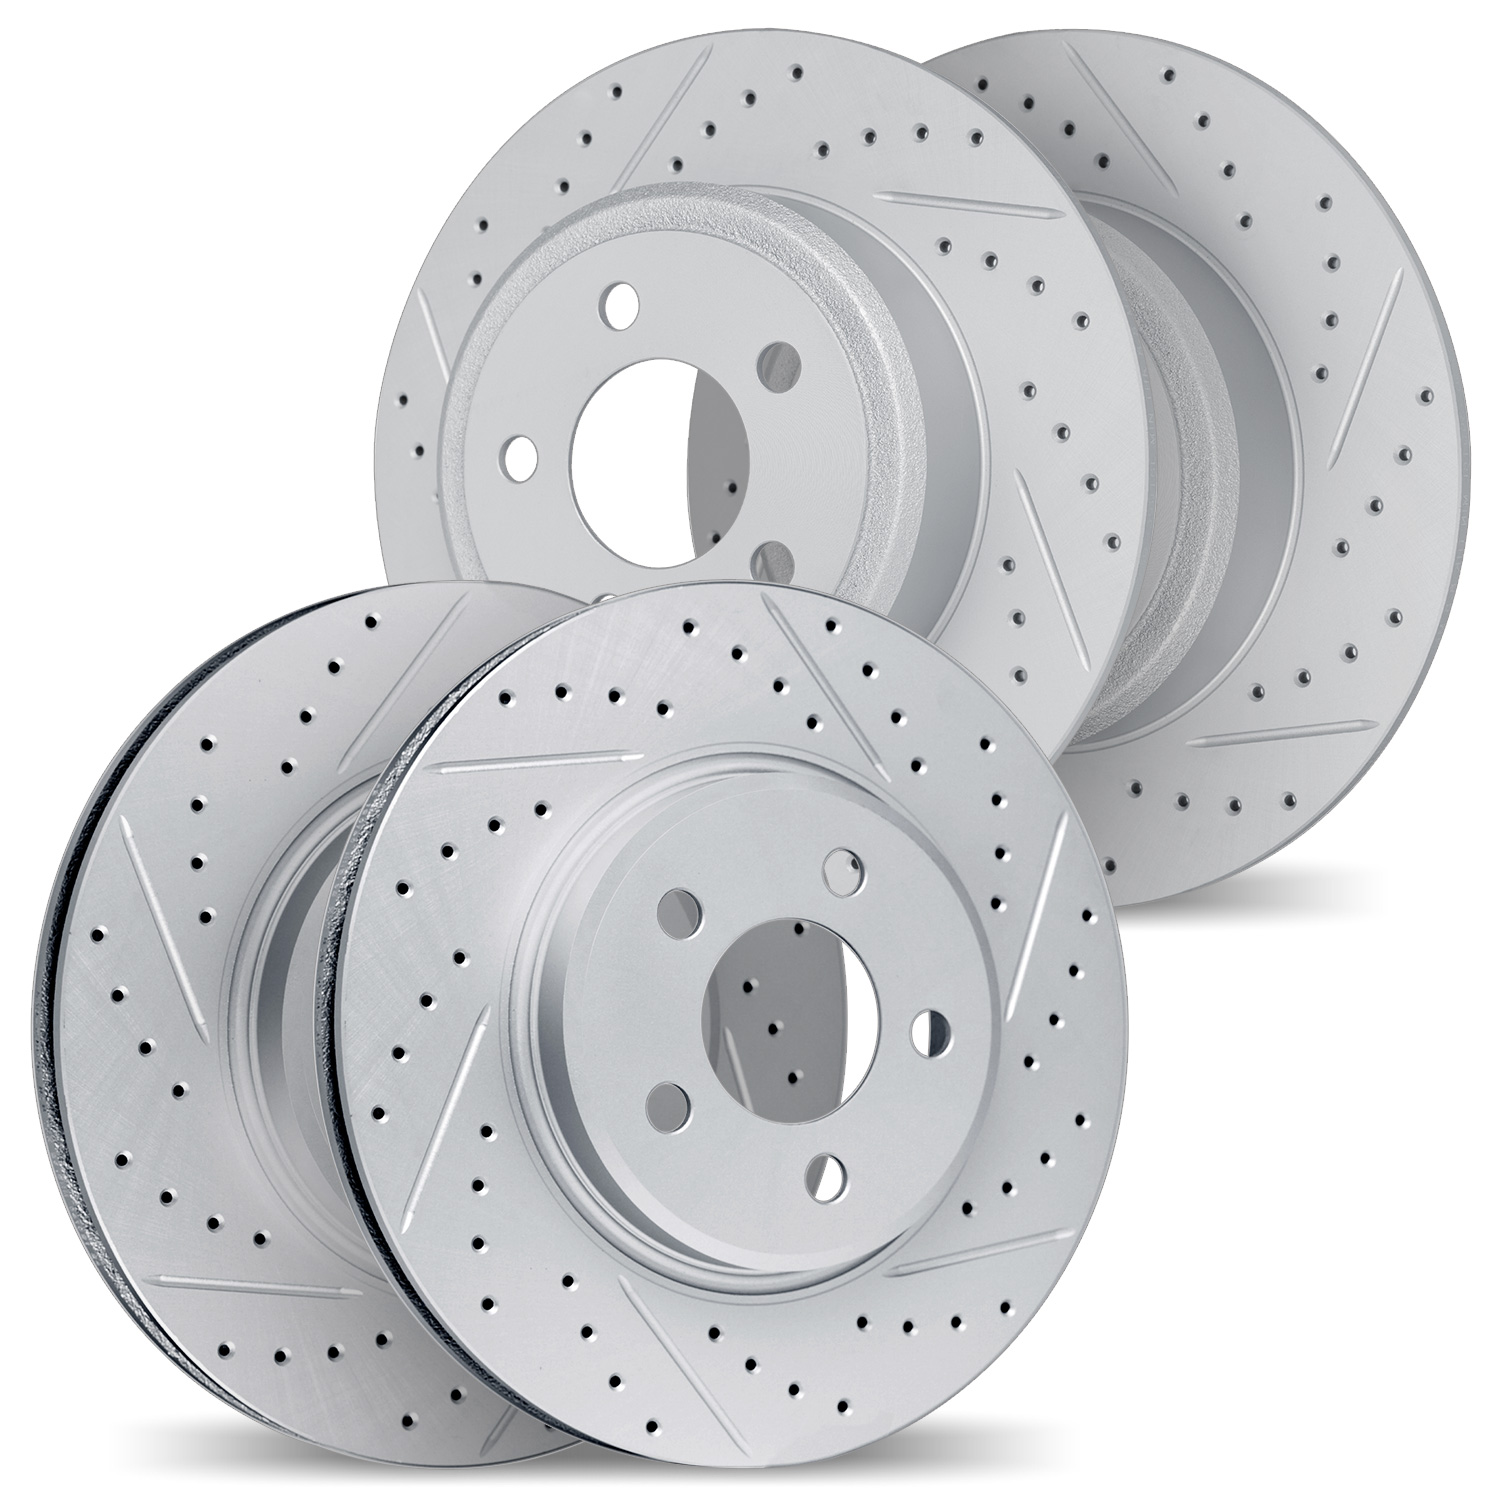 2004-63004 Geoperformance Drilled/Slotted Brake Rotors, 1984-1995 Mercedes-Benz, Position: Front and Rear